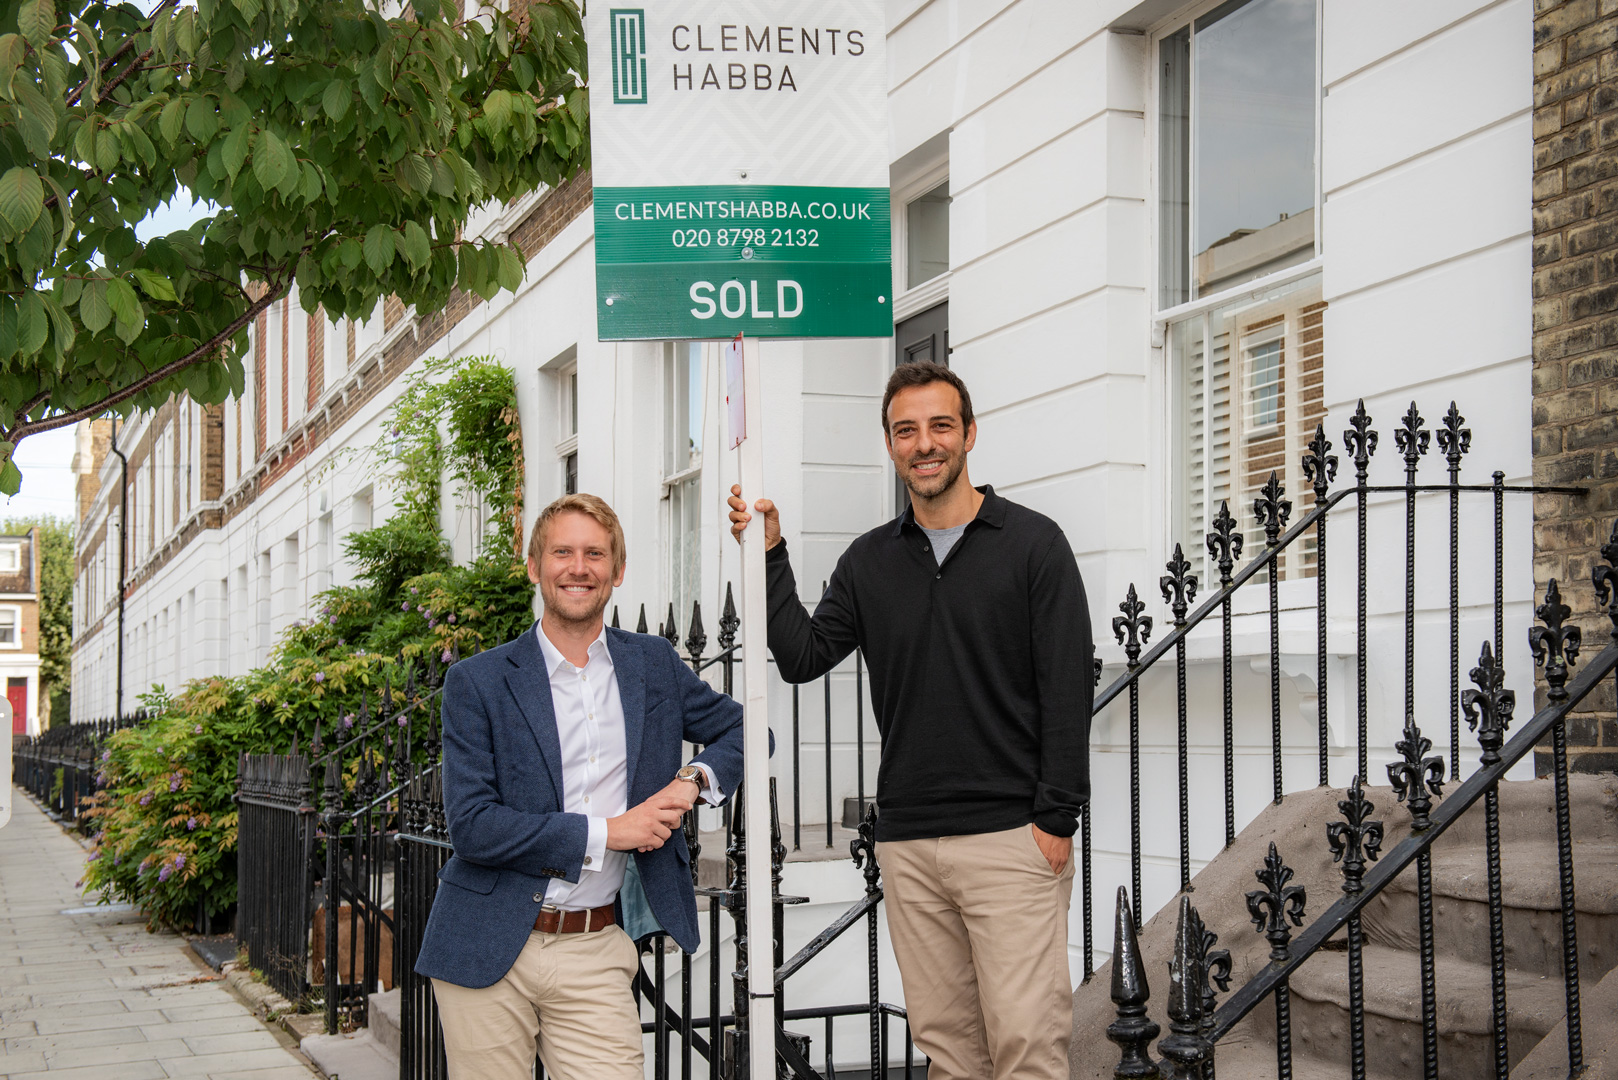 Chiswick Homes: Clements Habba – The Property Professionals